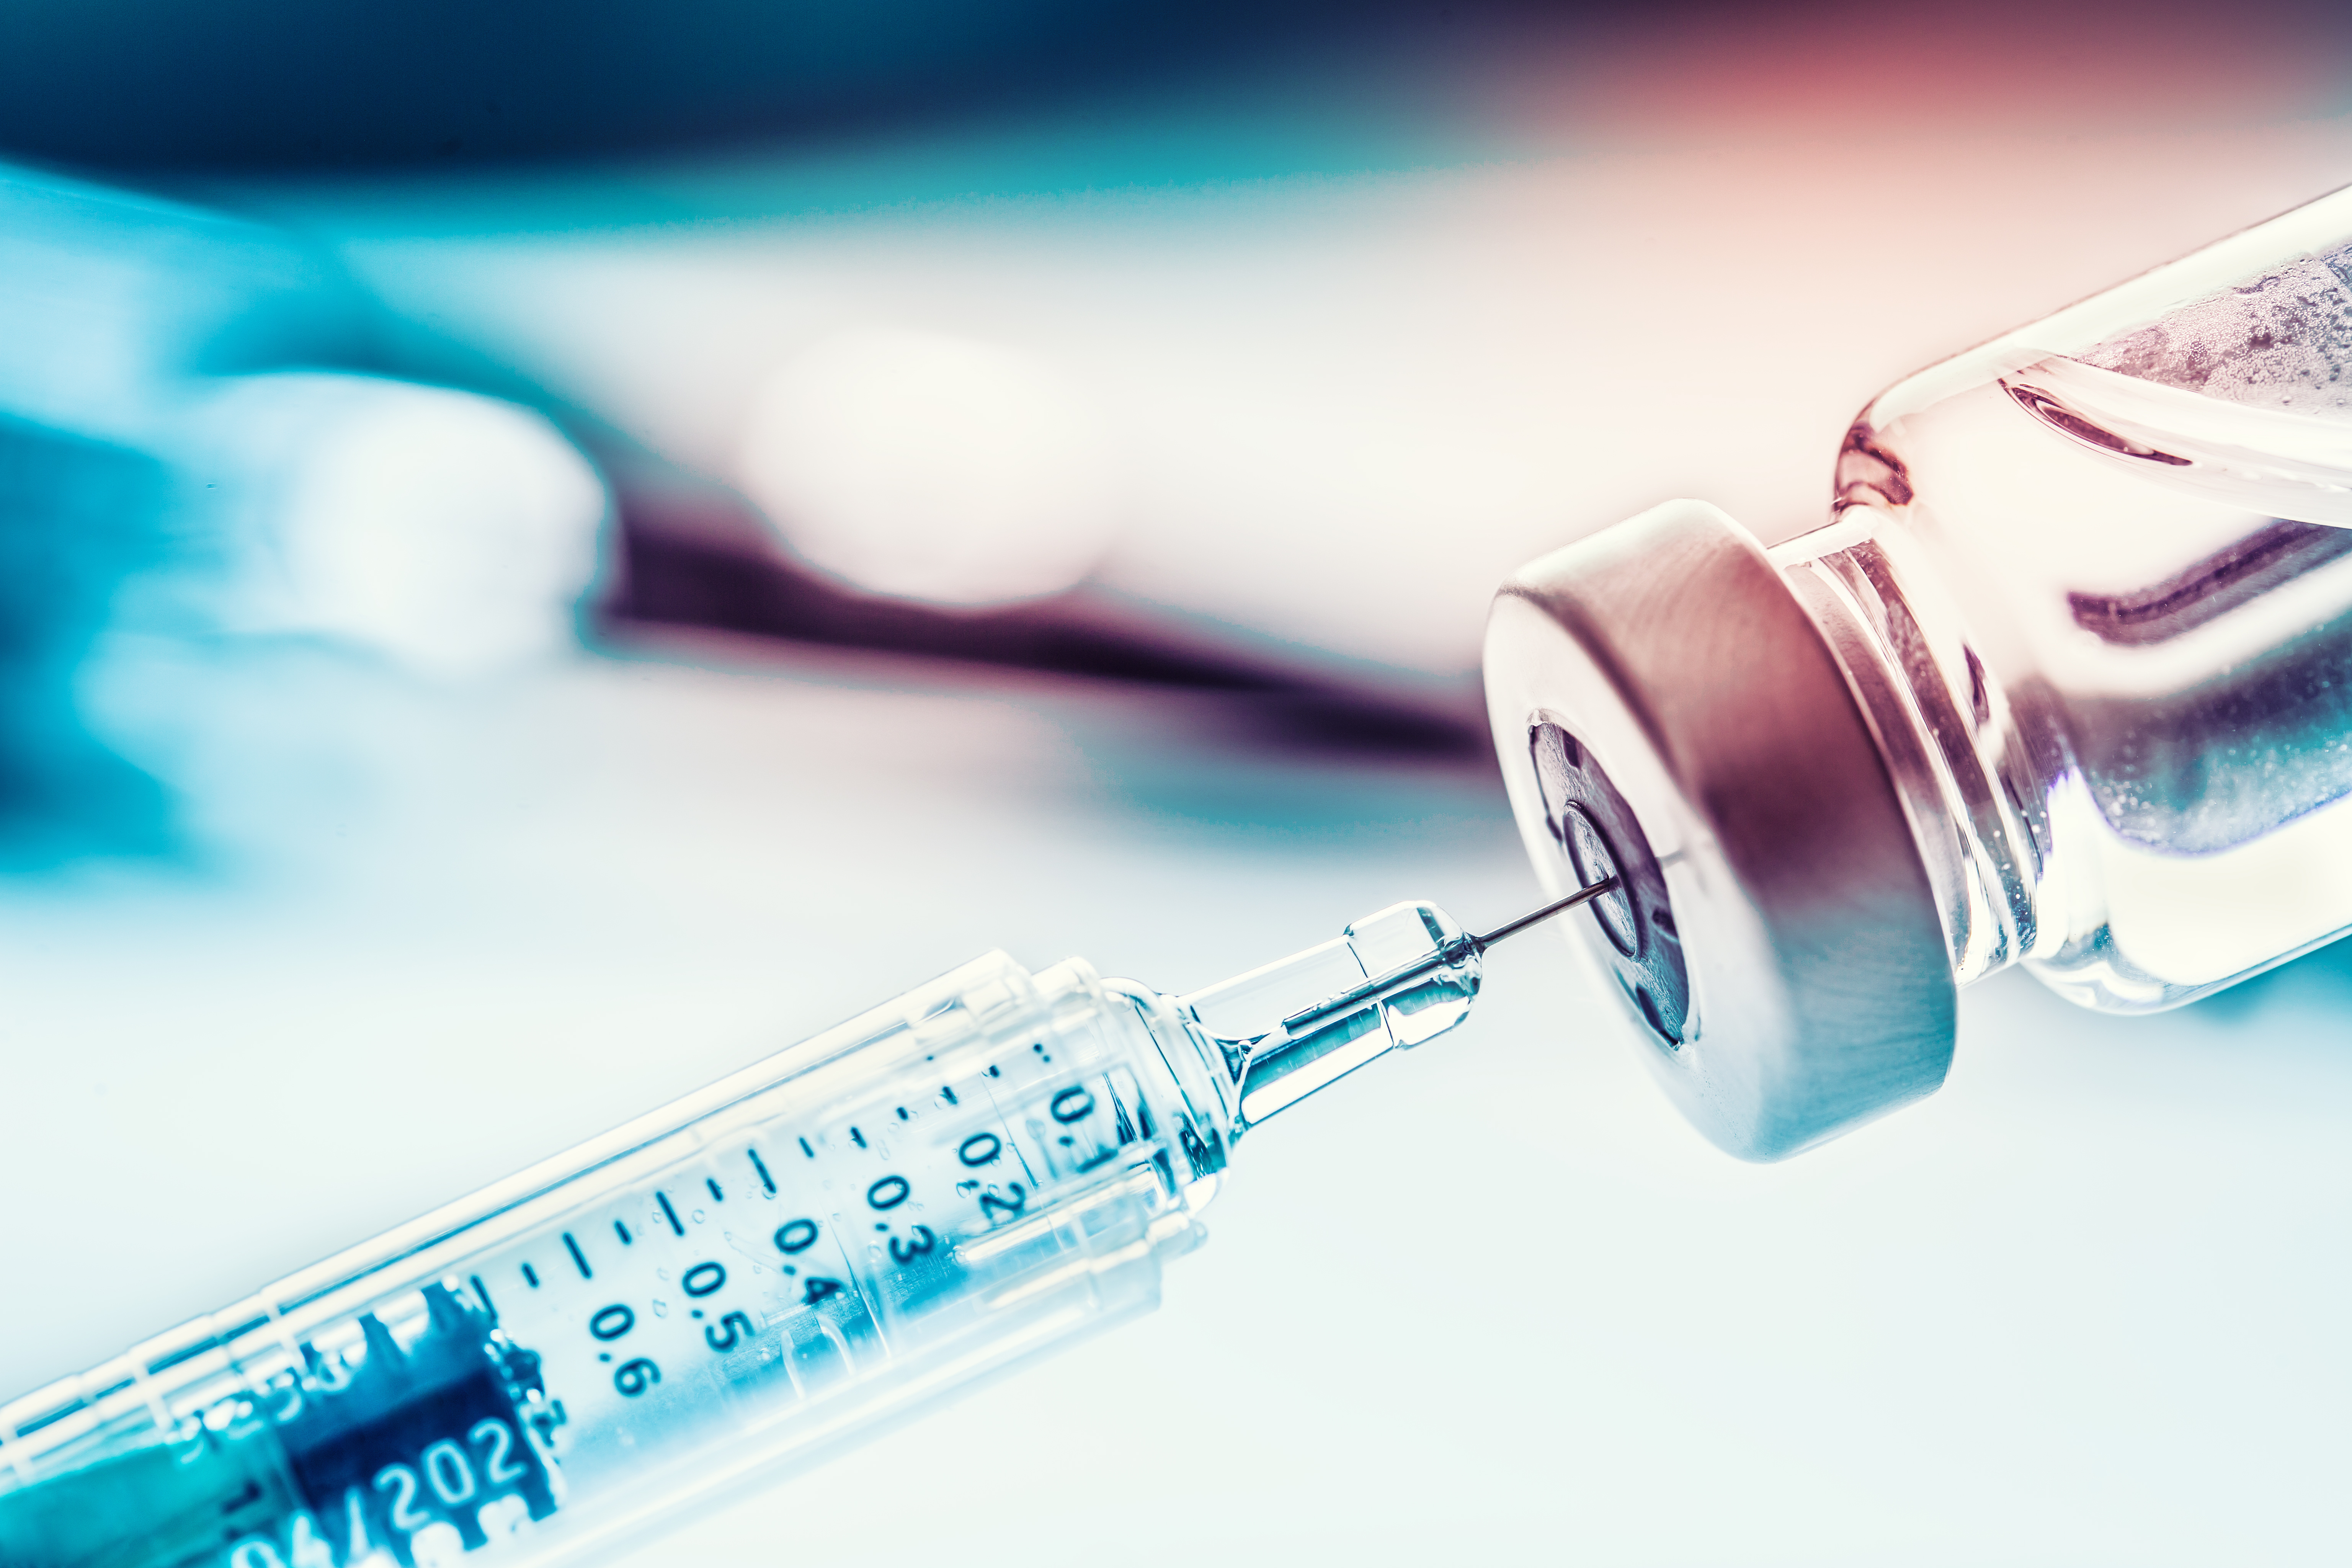 Special report 19/2022: EU COVID-19 vaccine procurement – Sufficient doses secured after initial challenges, but performance of the process not sufficiently assessed